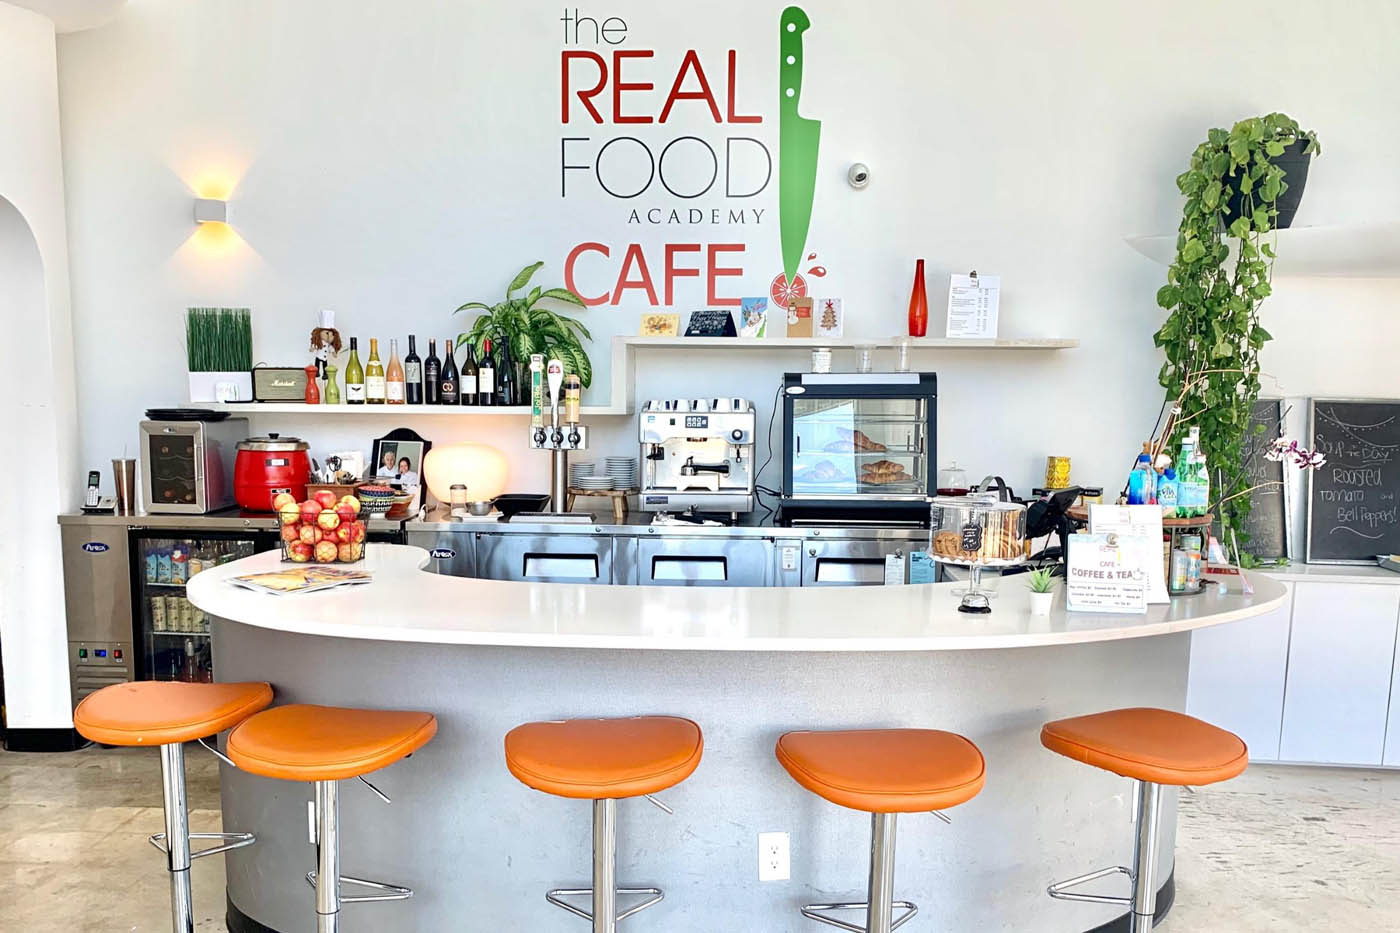 The Real Food Academy bar with orange chairs.